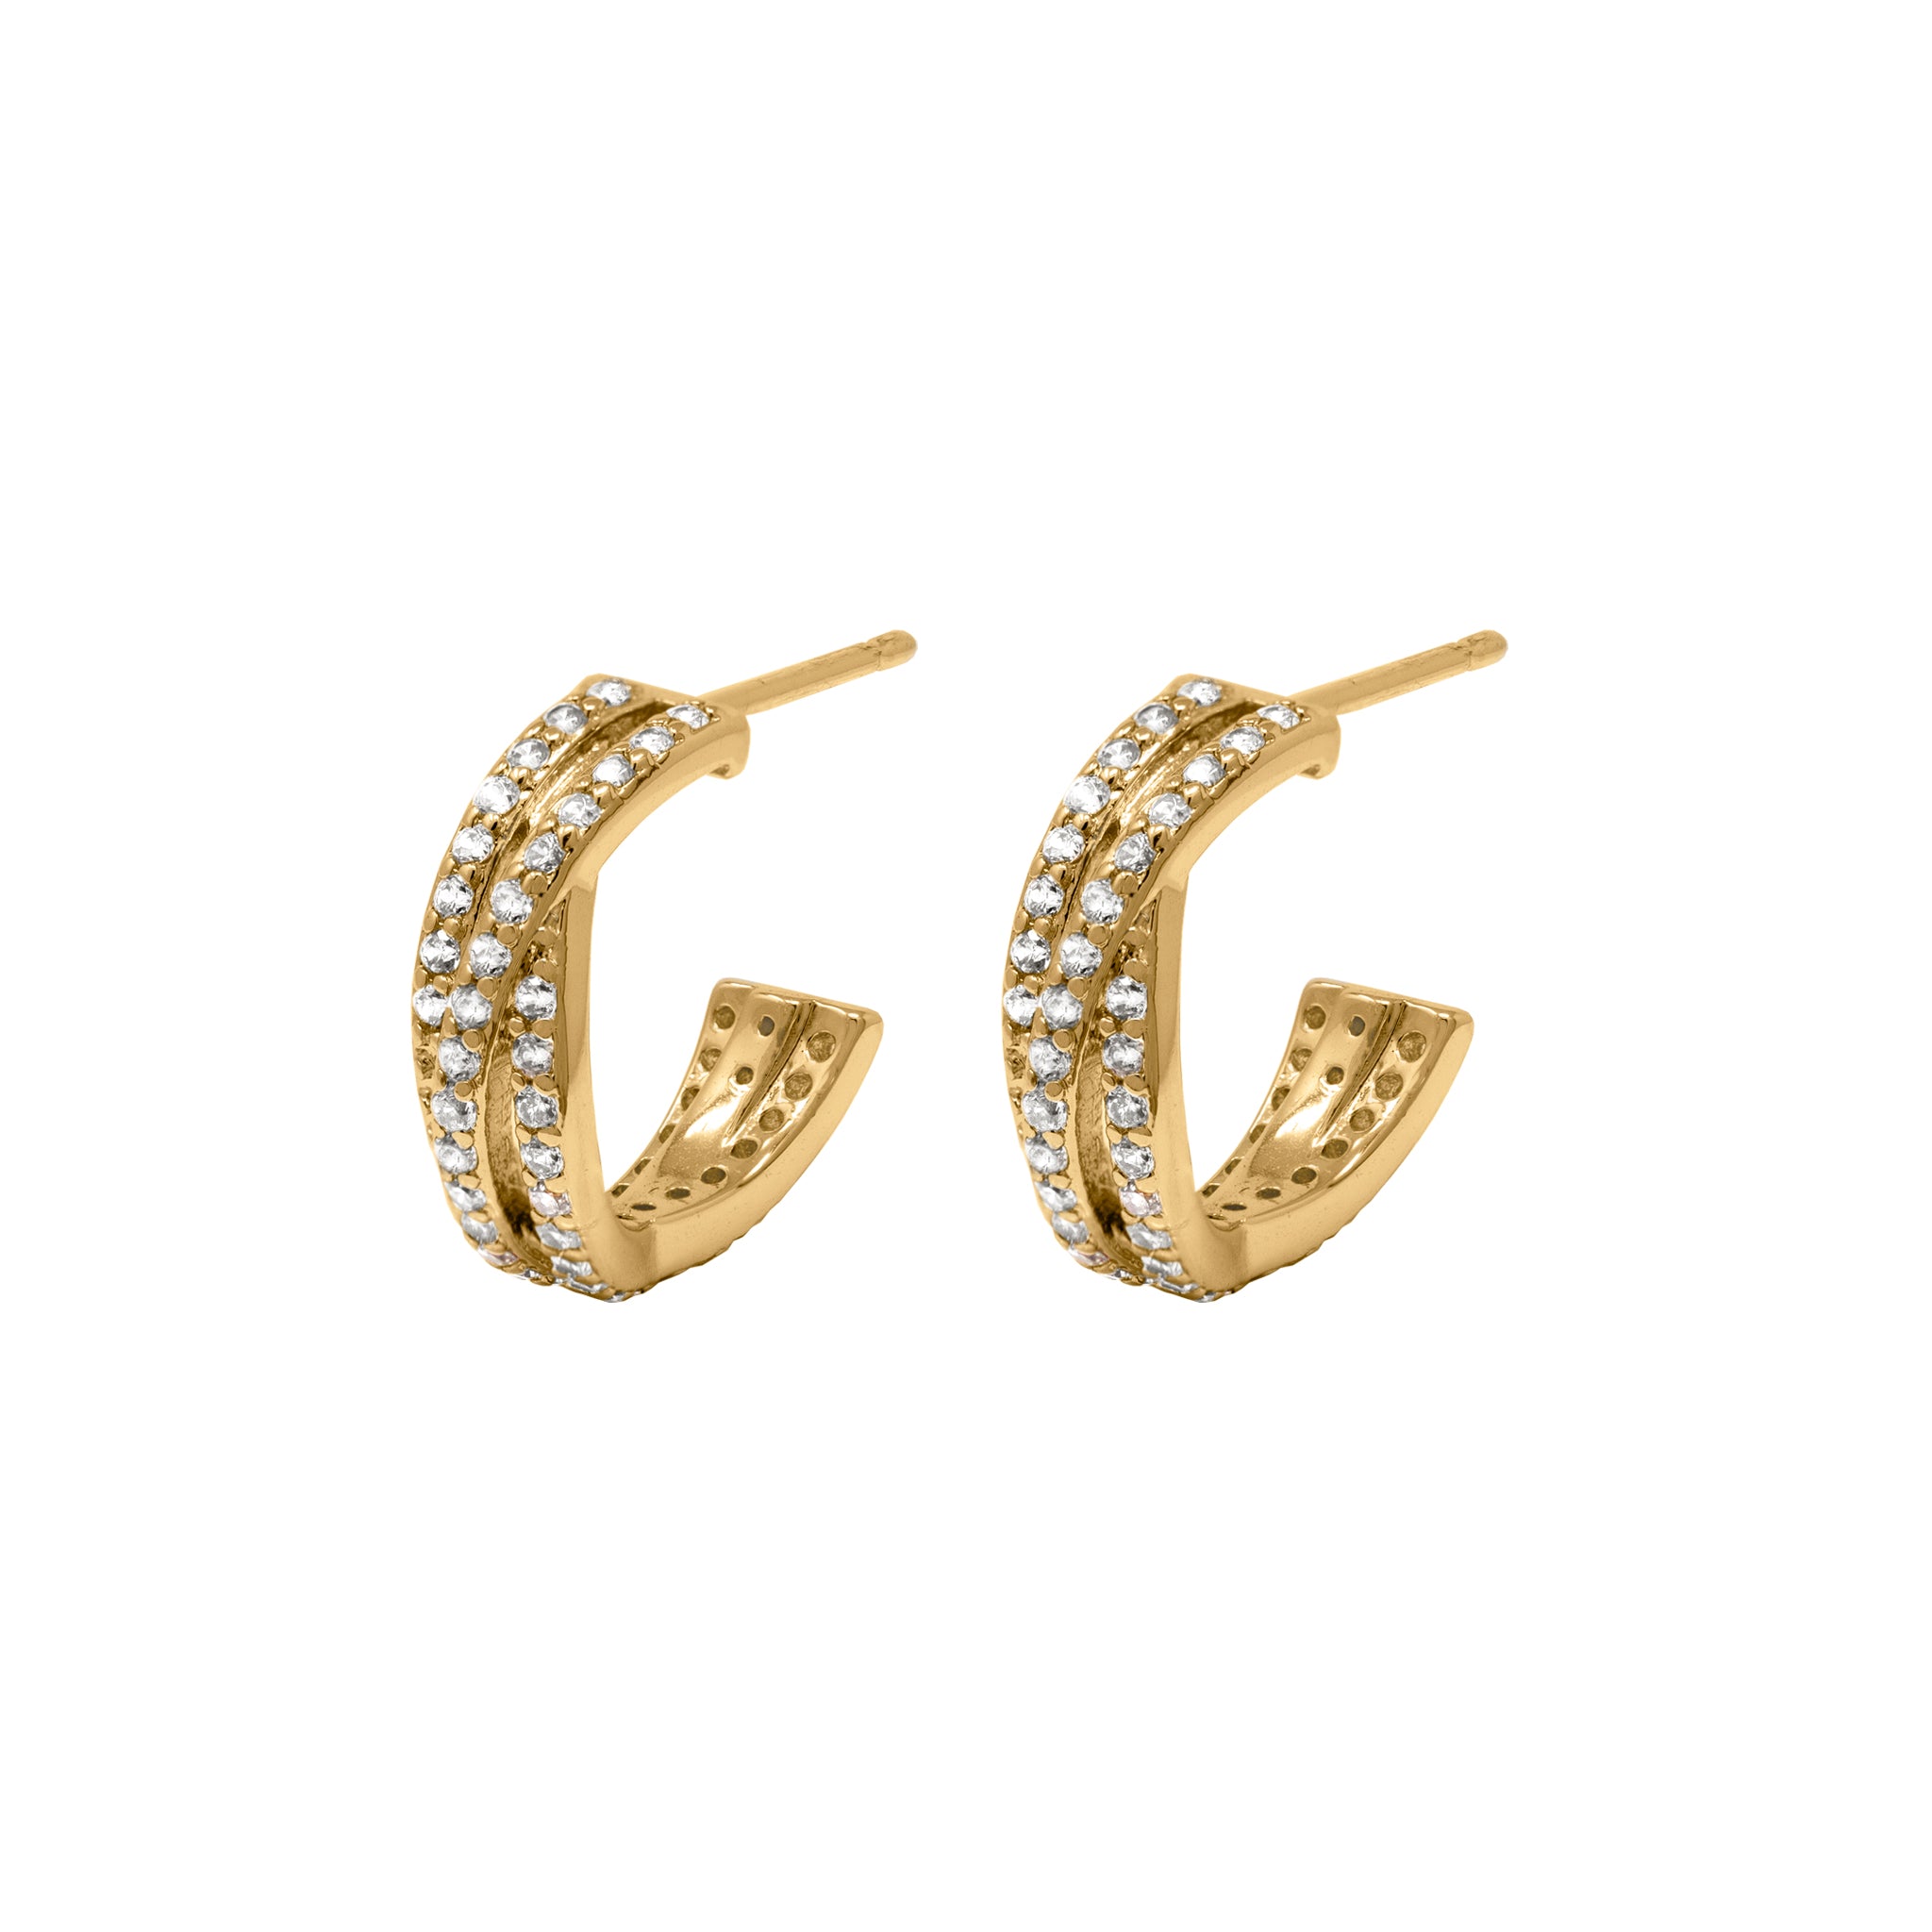 Dainty gold huggie earrings with cubic zirconia.